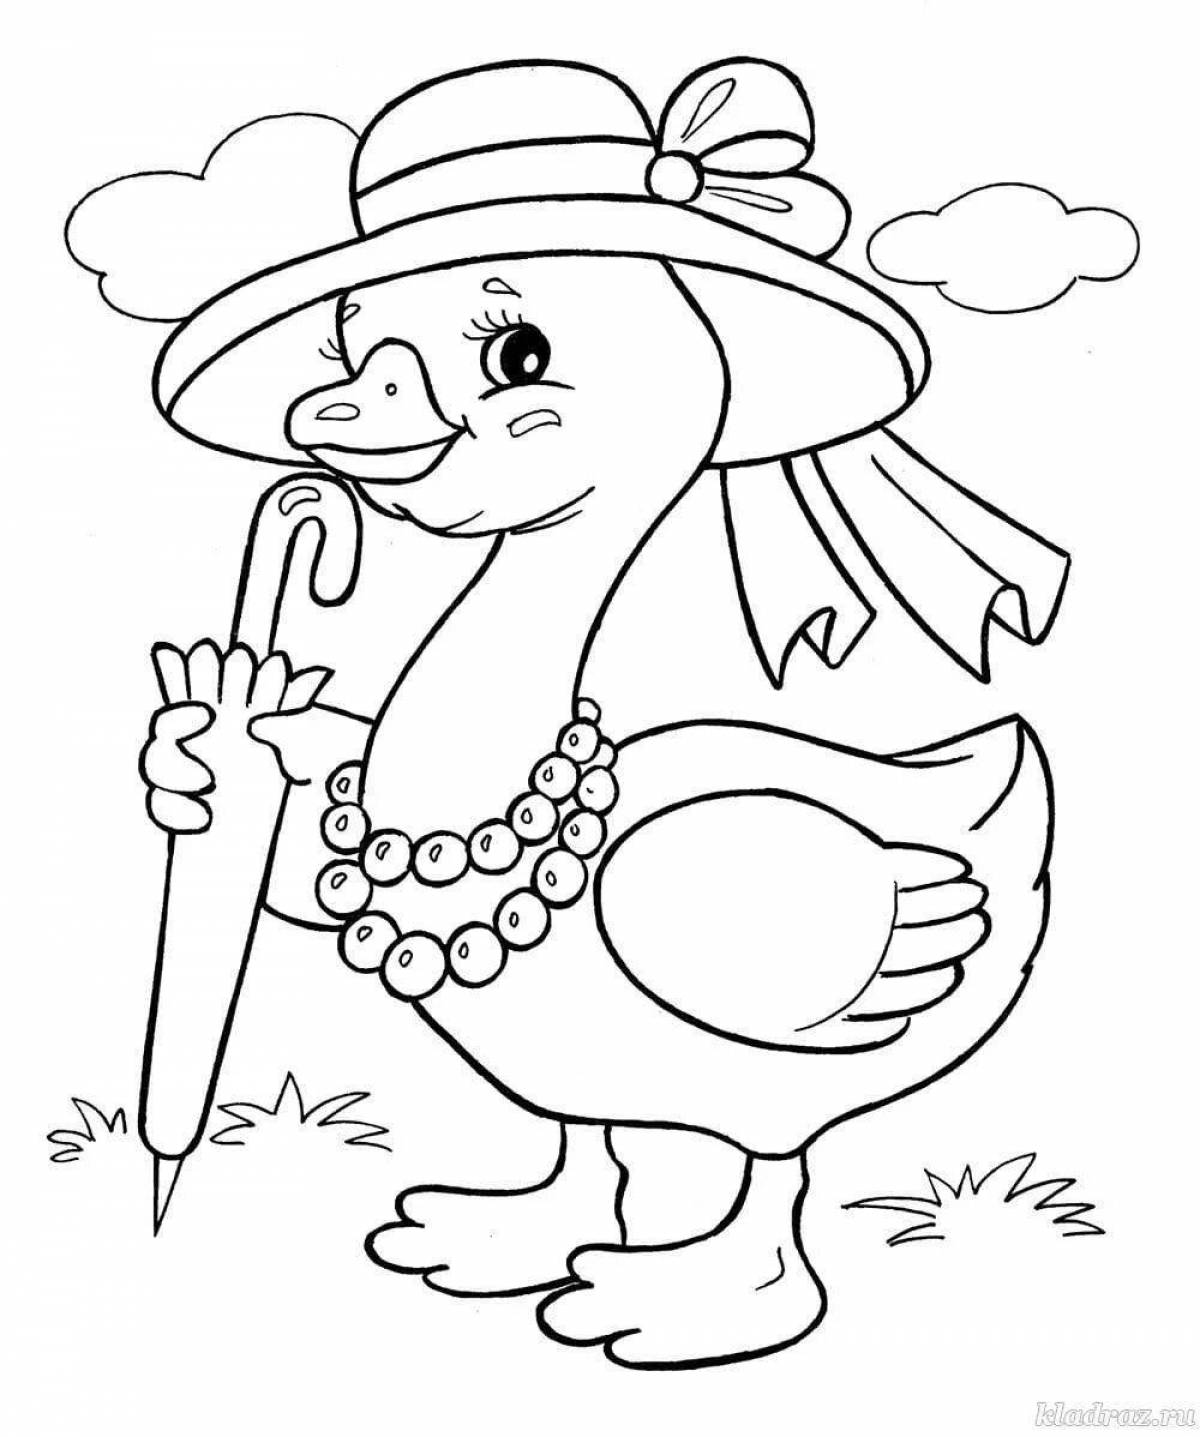 Humorous coloring book for 3-4 year olds